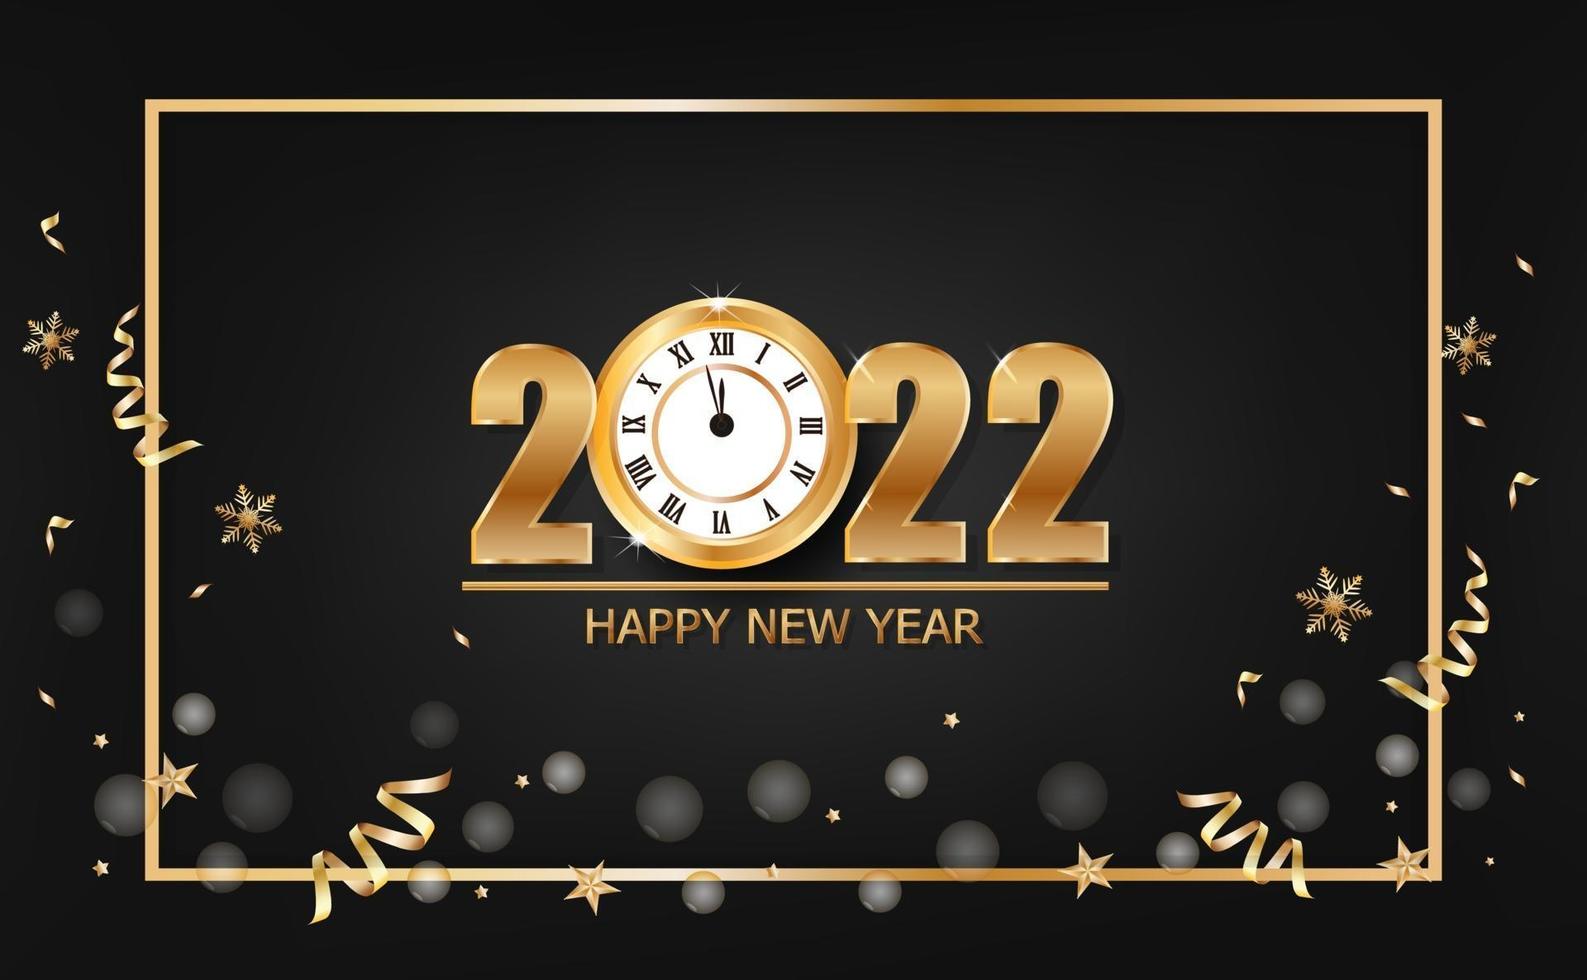 Happy new year 2022 banner with gold clock on black background 2926422